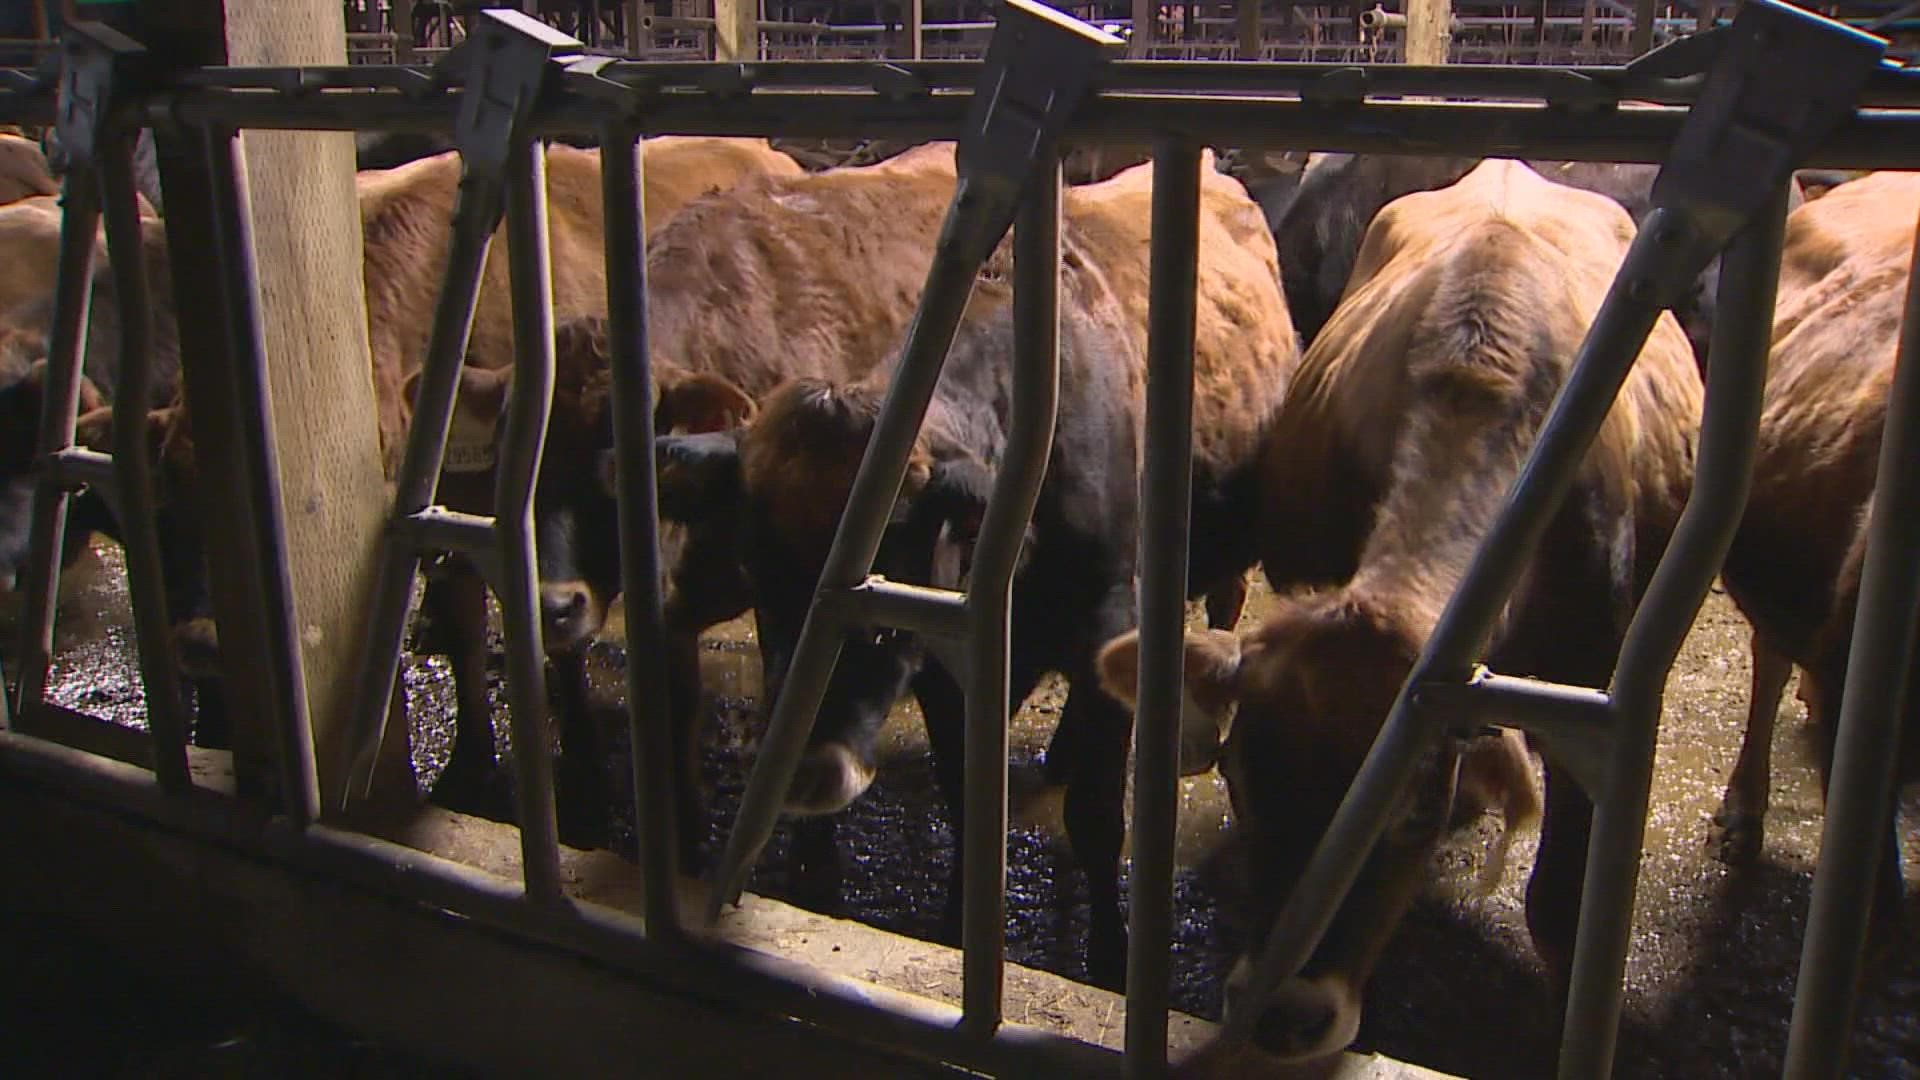 The Washington Dairy Federation said more than 100,000 cows are at risk of running short of feed due to the flooding.